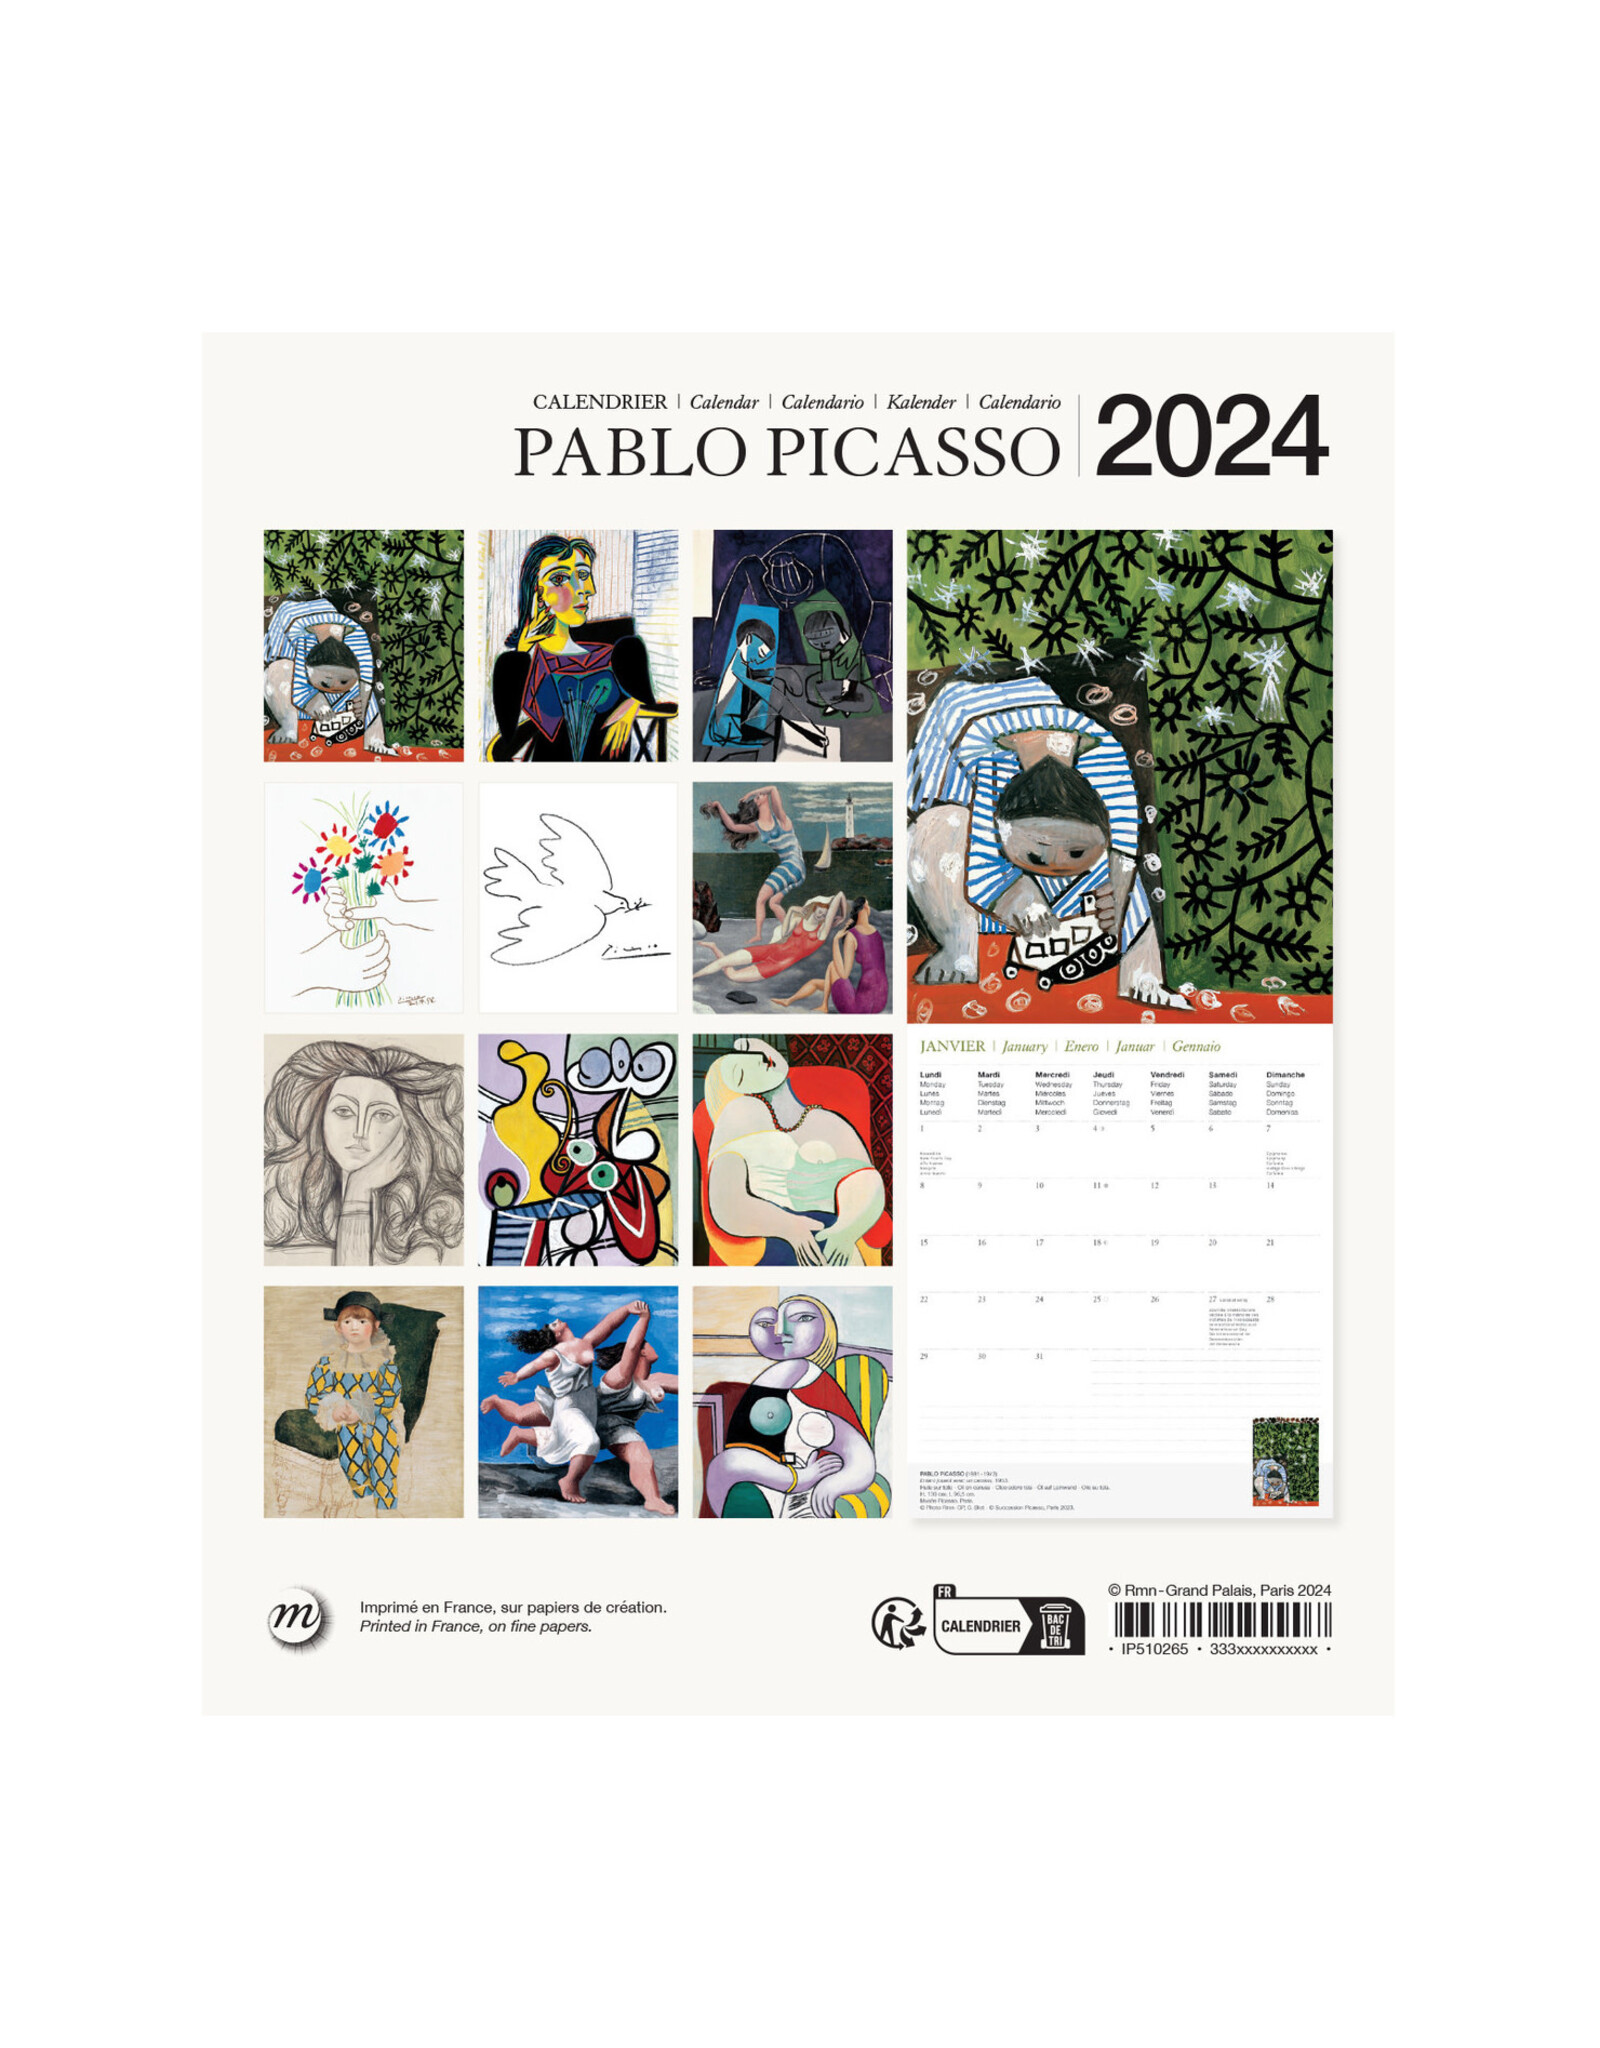 Reunion des Musees Nationaux Pablo Picasso 2024 Small Wall Calendar